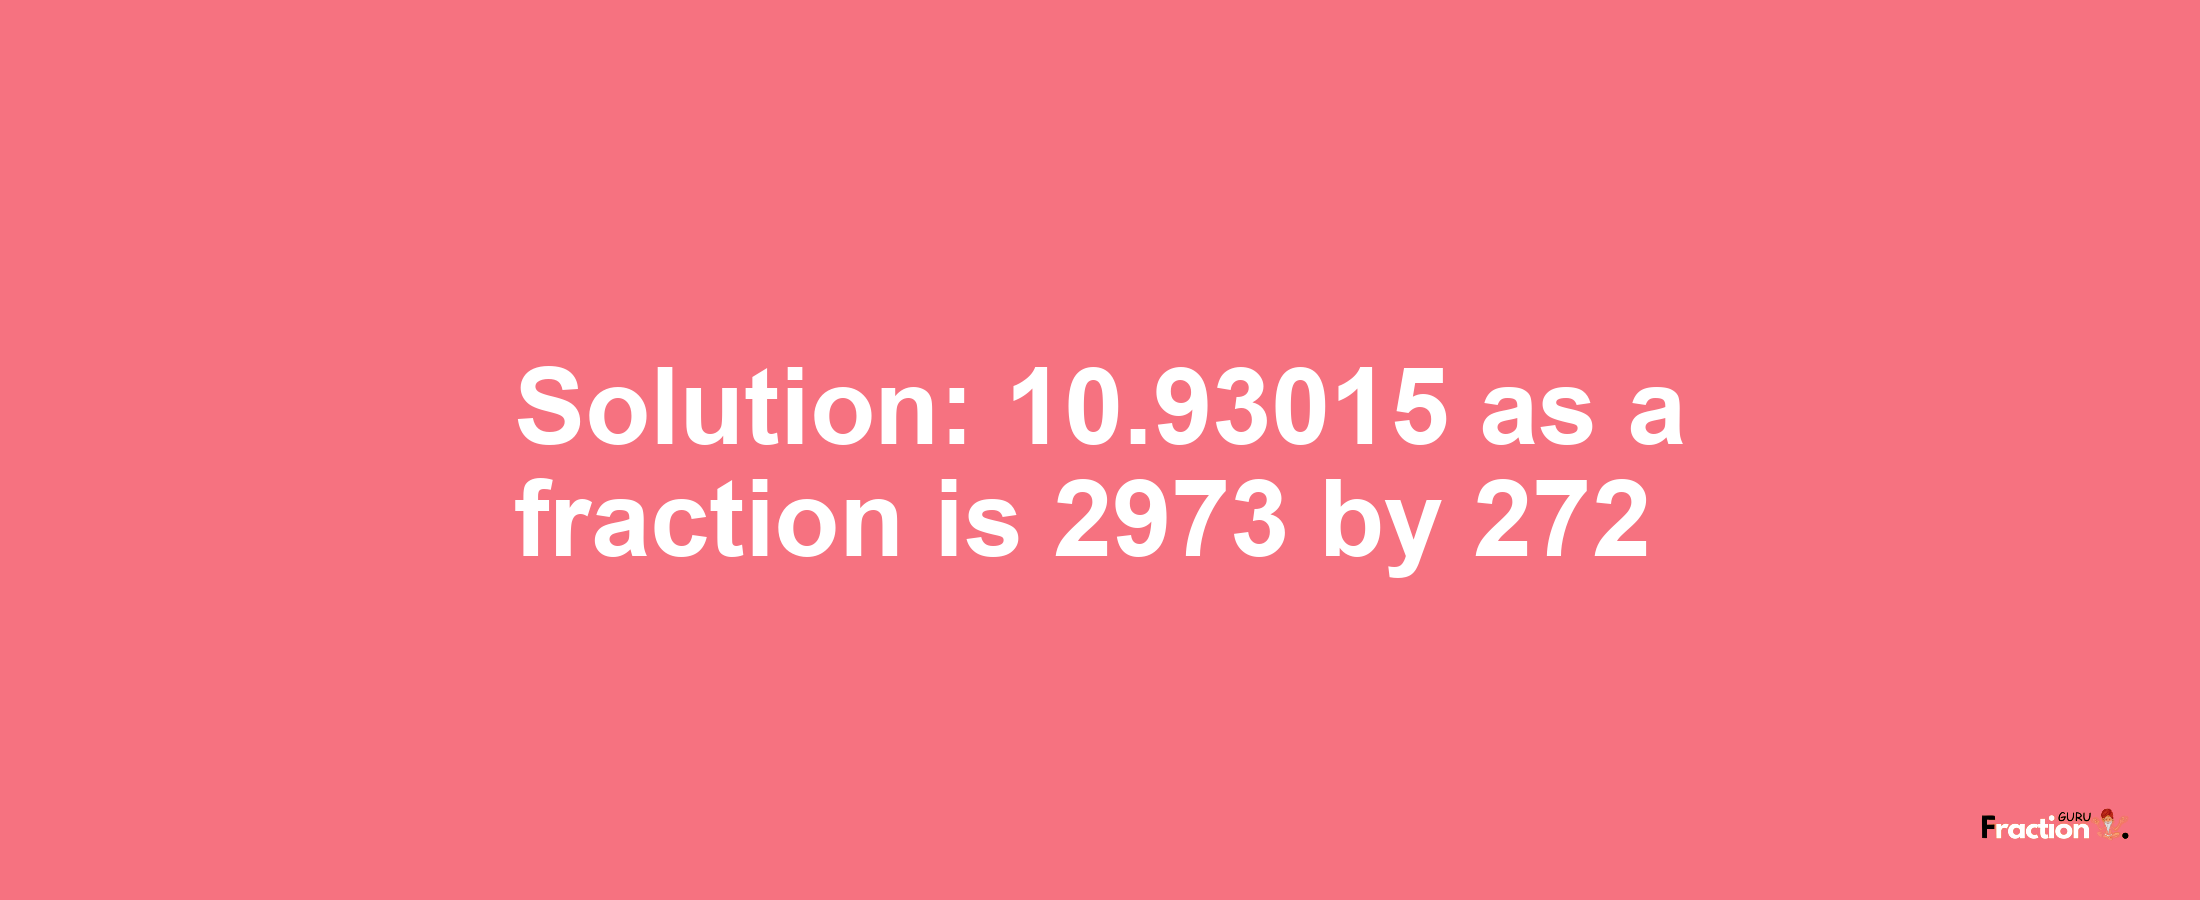 Solution:10.93015 as a fraction is 2973/272